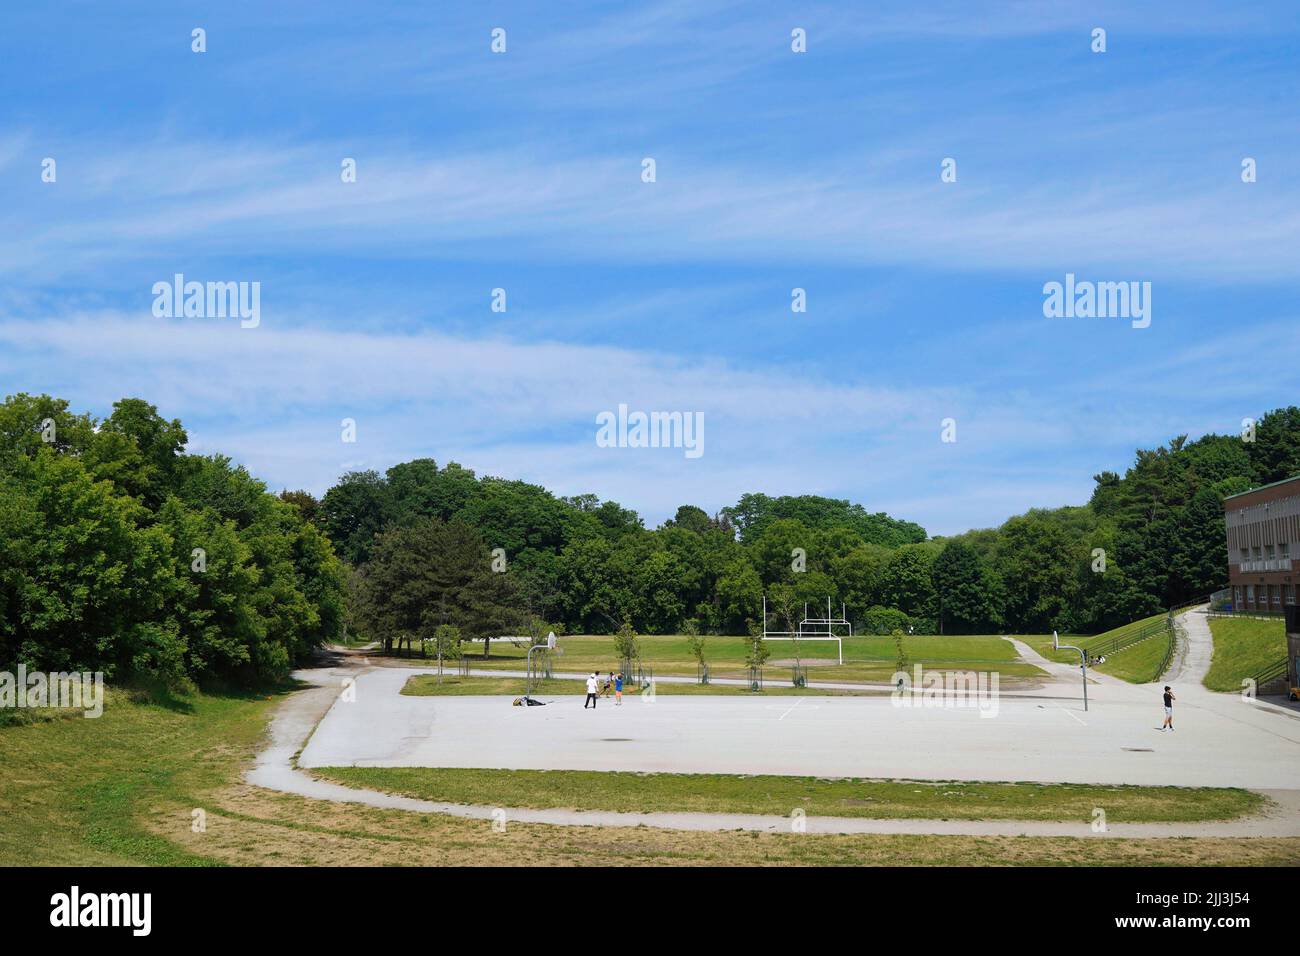 Sports field beside a school, surrounded by trees Stock Photo